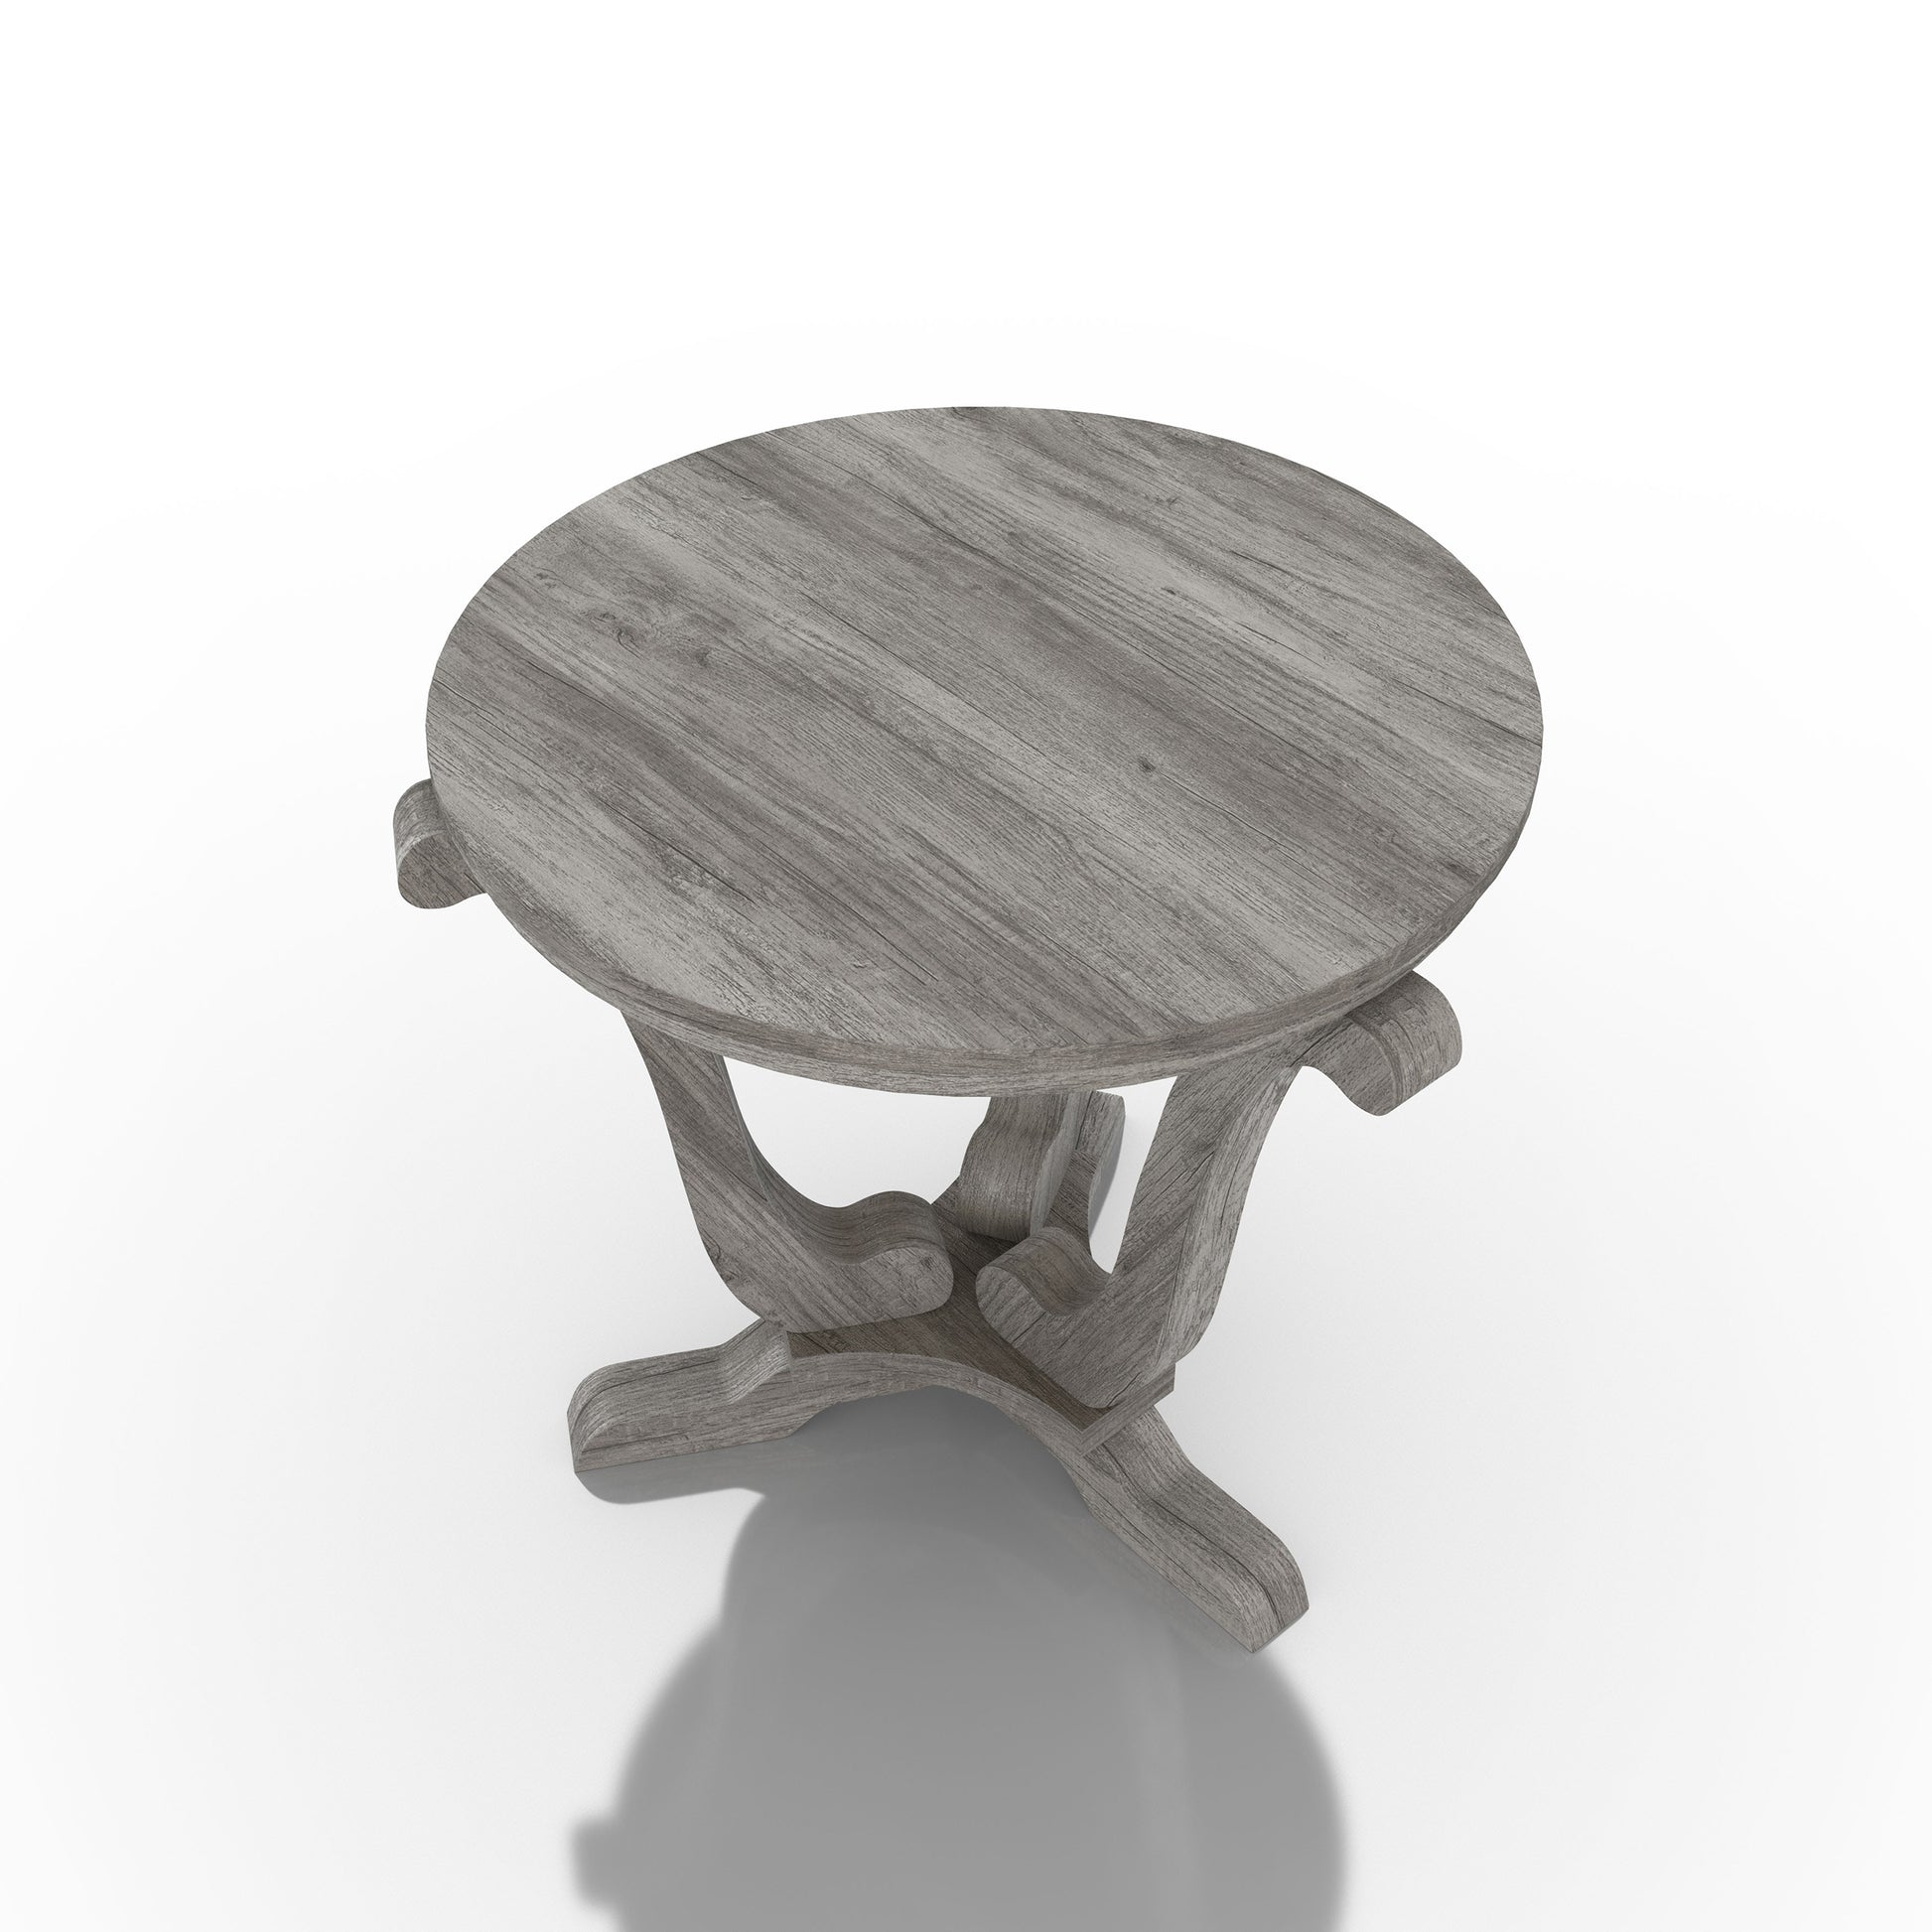 Right angled bird's eye view of one farmhouse vintage gray oak curved pedestal end table on a white background